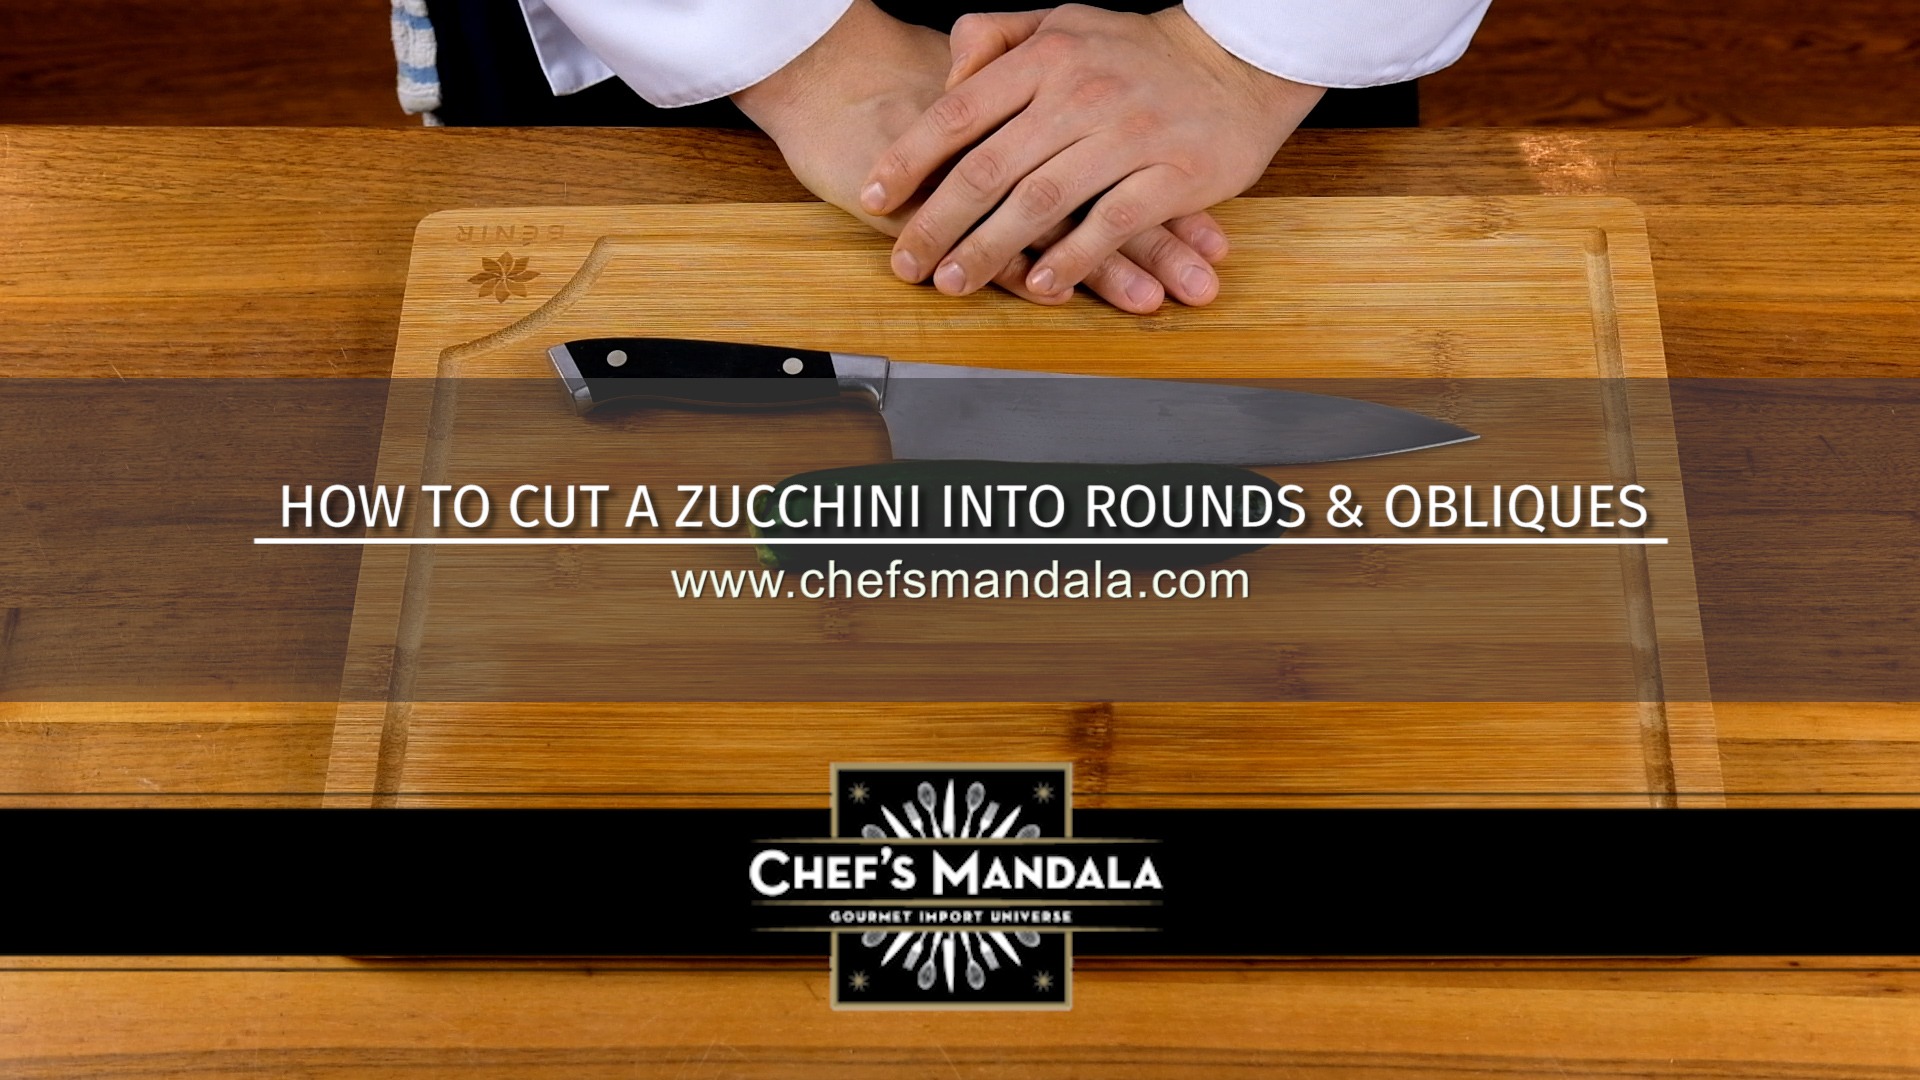 HOW TO CUT A ZUCCHINI INTO ROUNDS & OBLIQUES